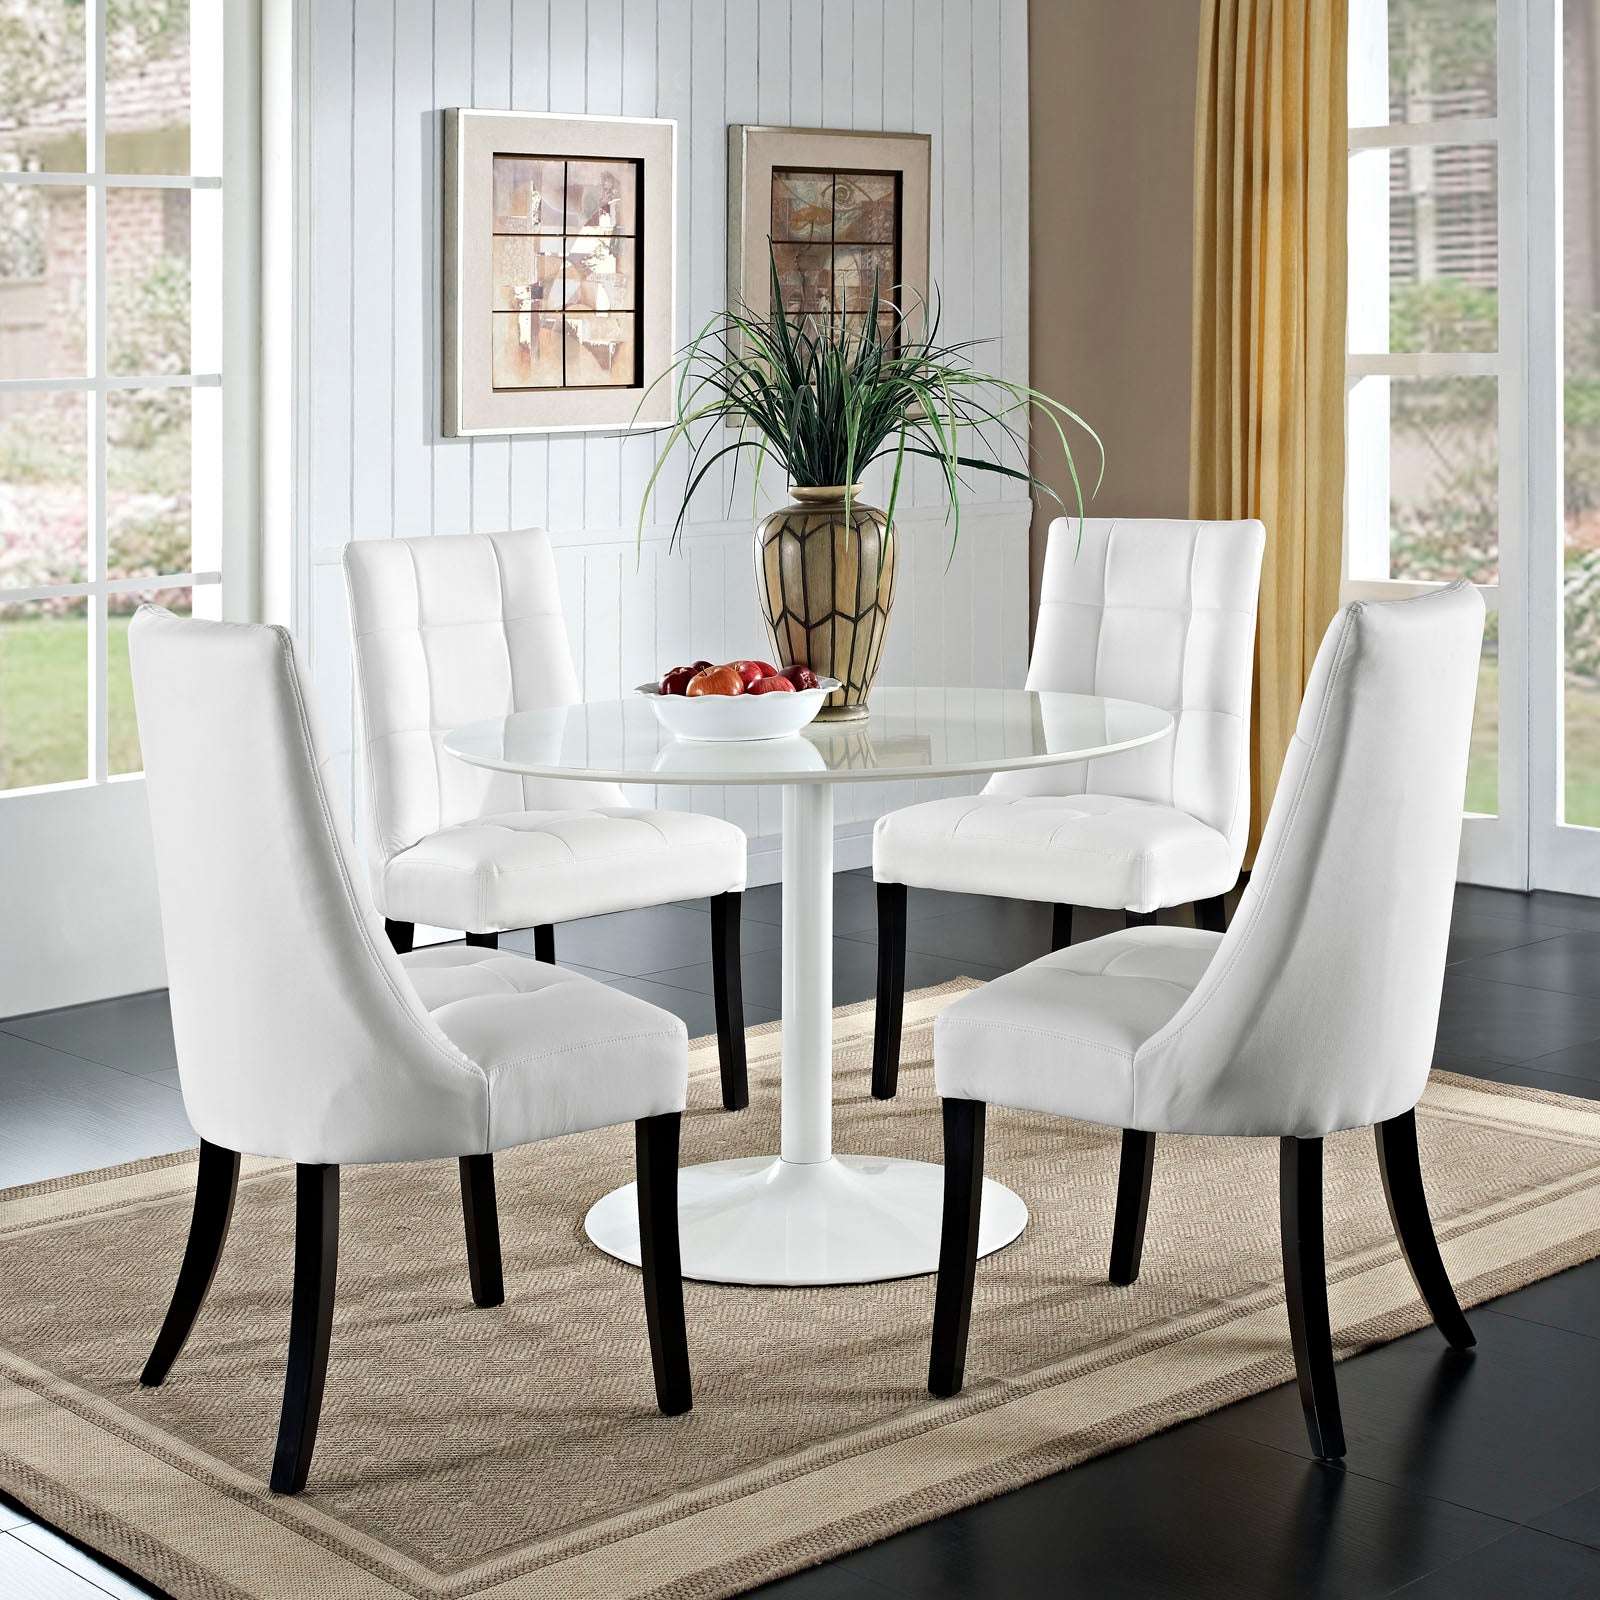 Noblesse Dining Chair Vinyl Set of 4